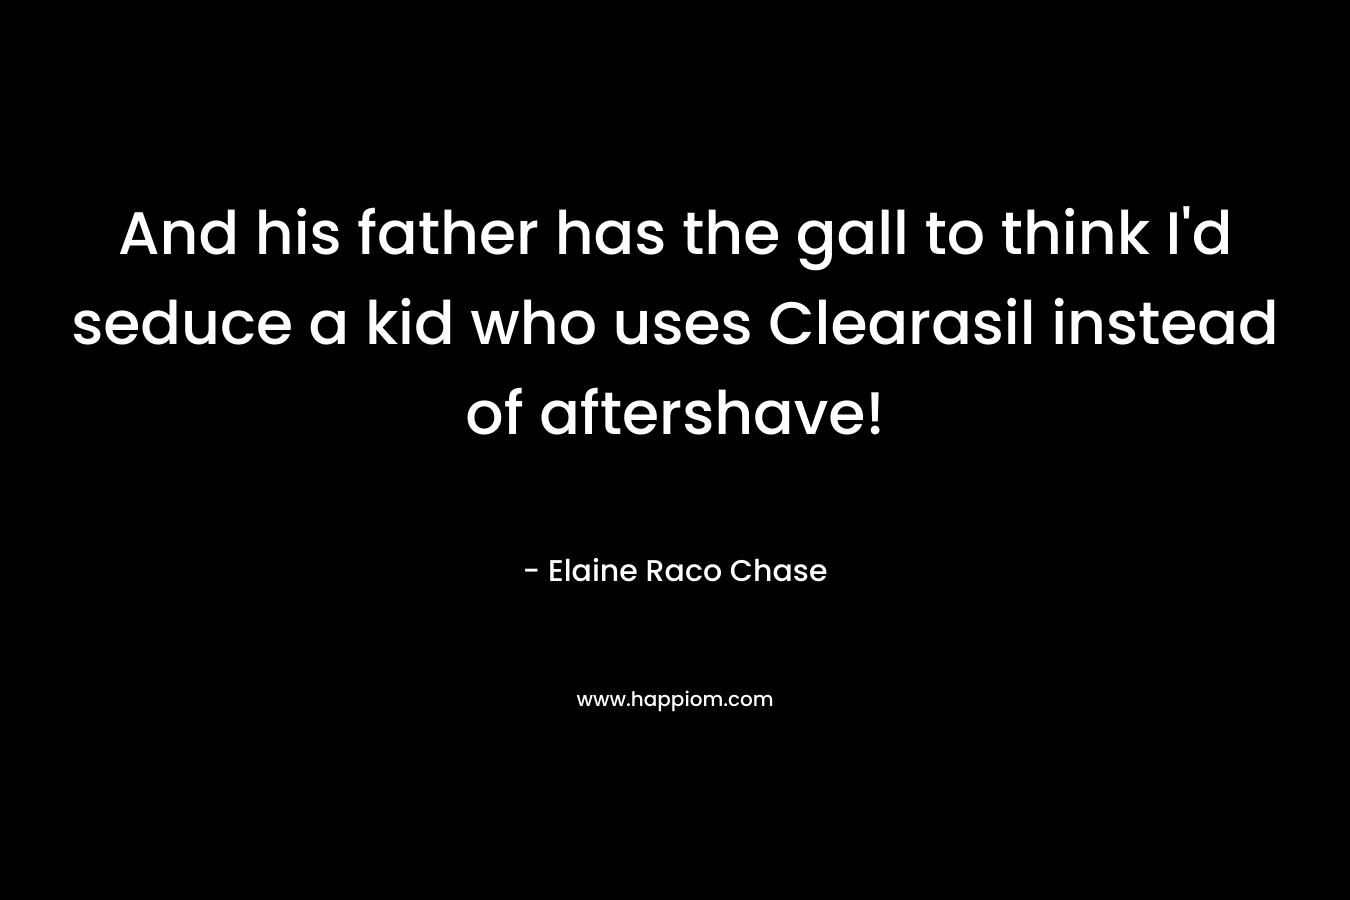 And his father has the gall to think I’d seduce a kid who uses Clearasil instead of aftershave! – Elaine Raco Chase